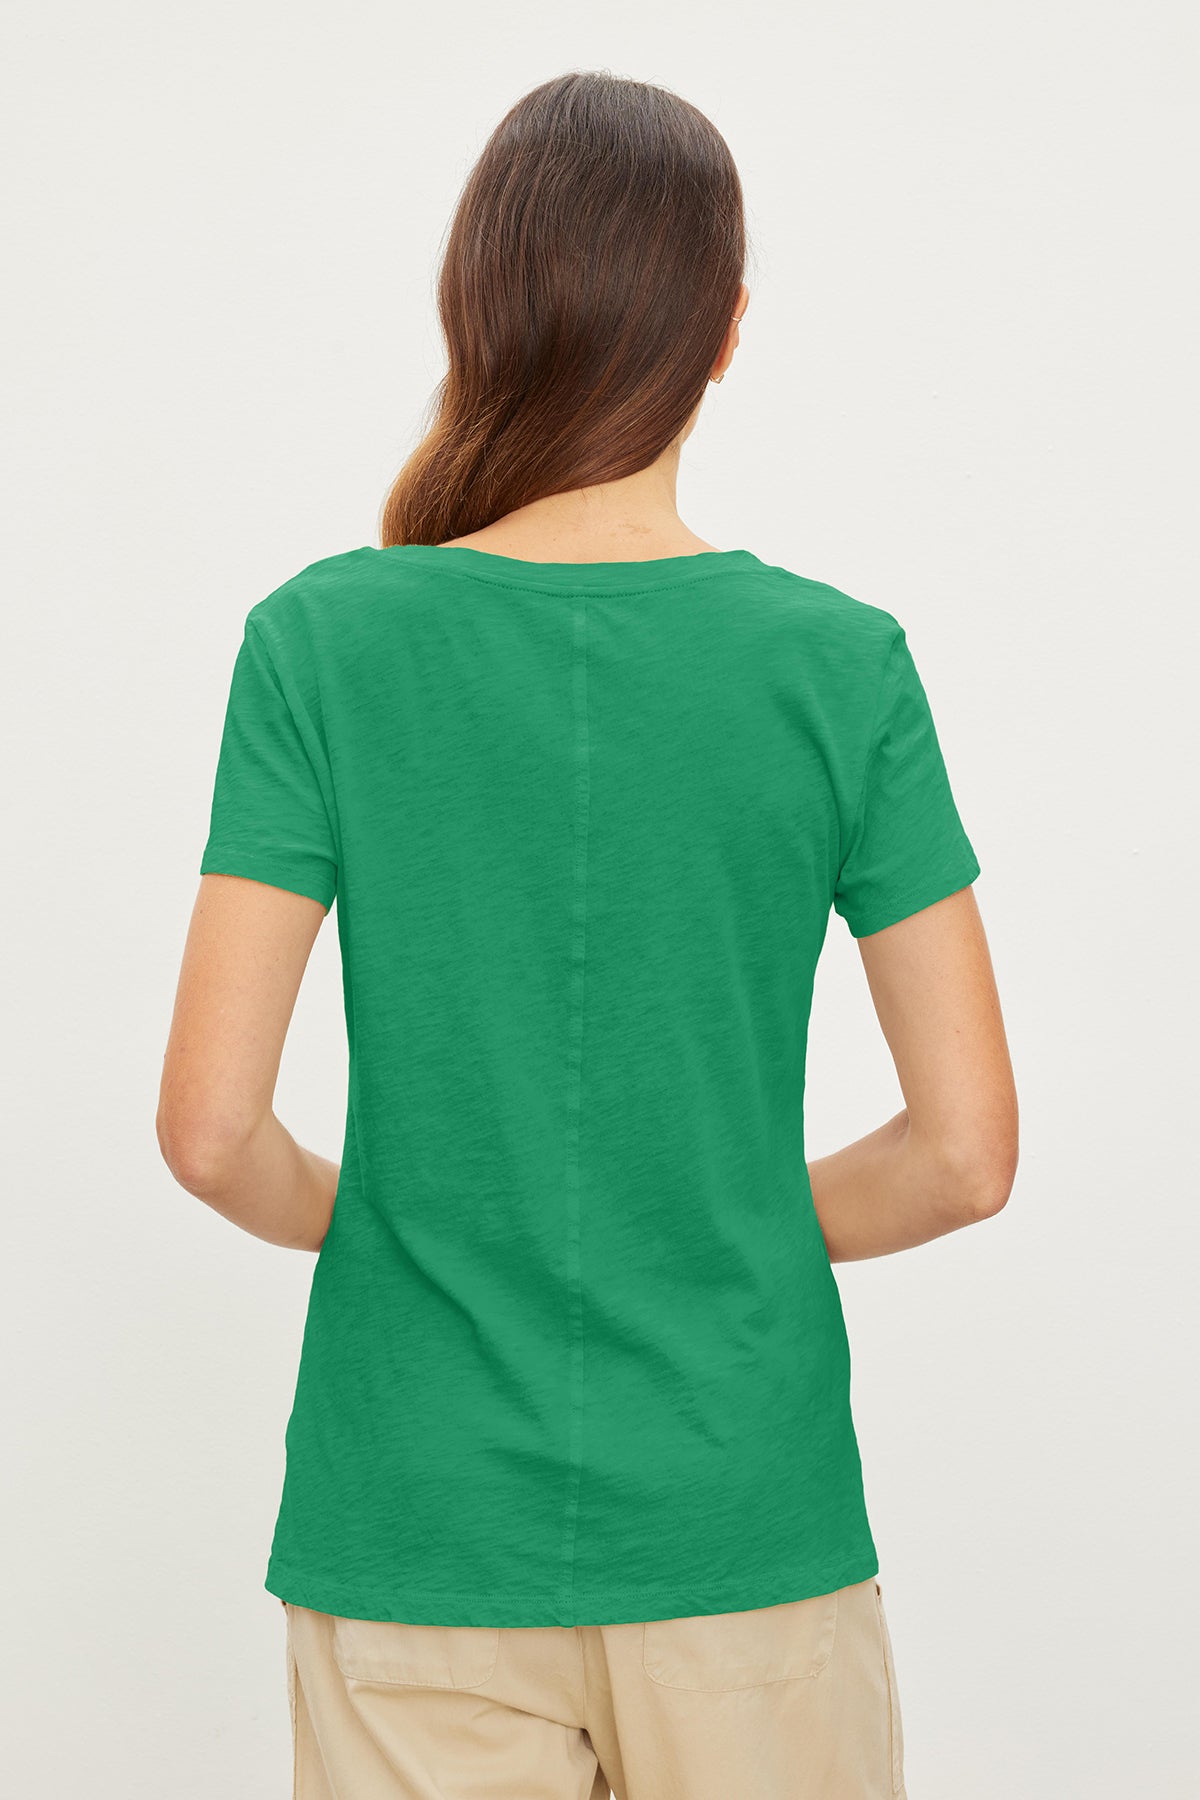 Rear view of a woman wearing a Velvet by Graham & Spencer LILITH COTTON SLUB V-NECK TEE and beige pants, standing against a white background.-36910215102657